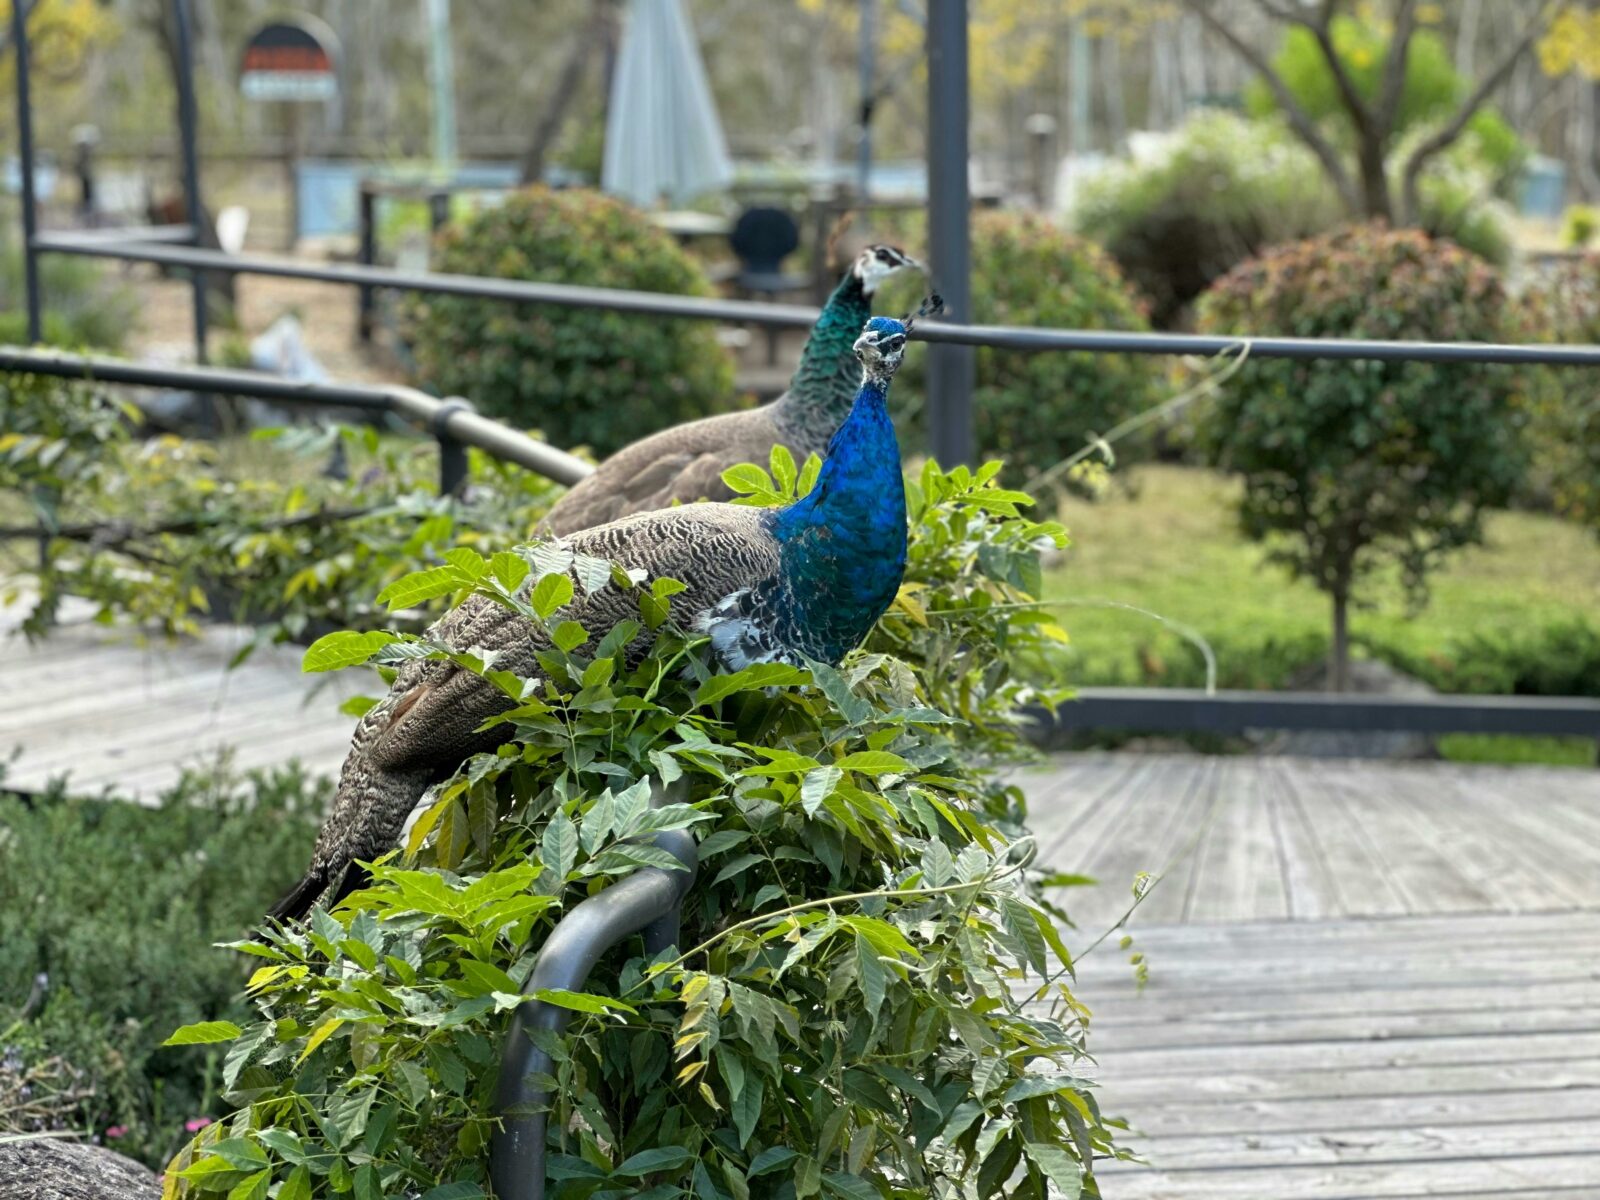 Free roaming peacocks, parrots and Guinea fowl